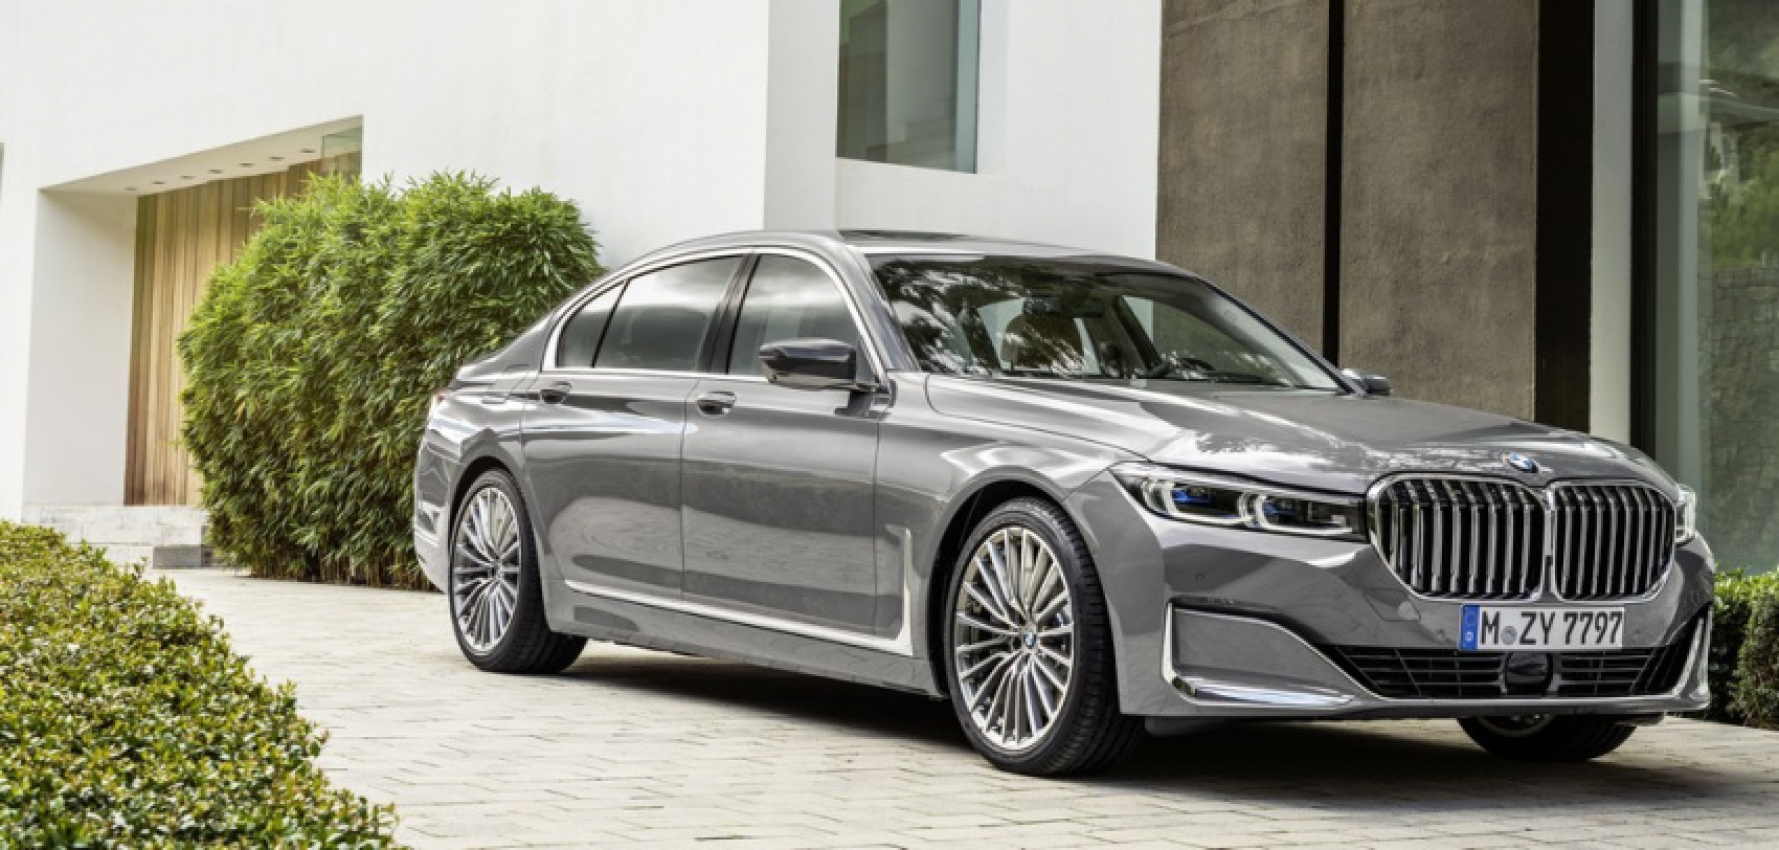 autos, bmw, cars, autos bmw, brash new bmw 7 series limo weighs in from shanghai